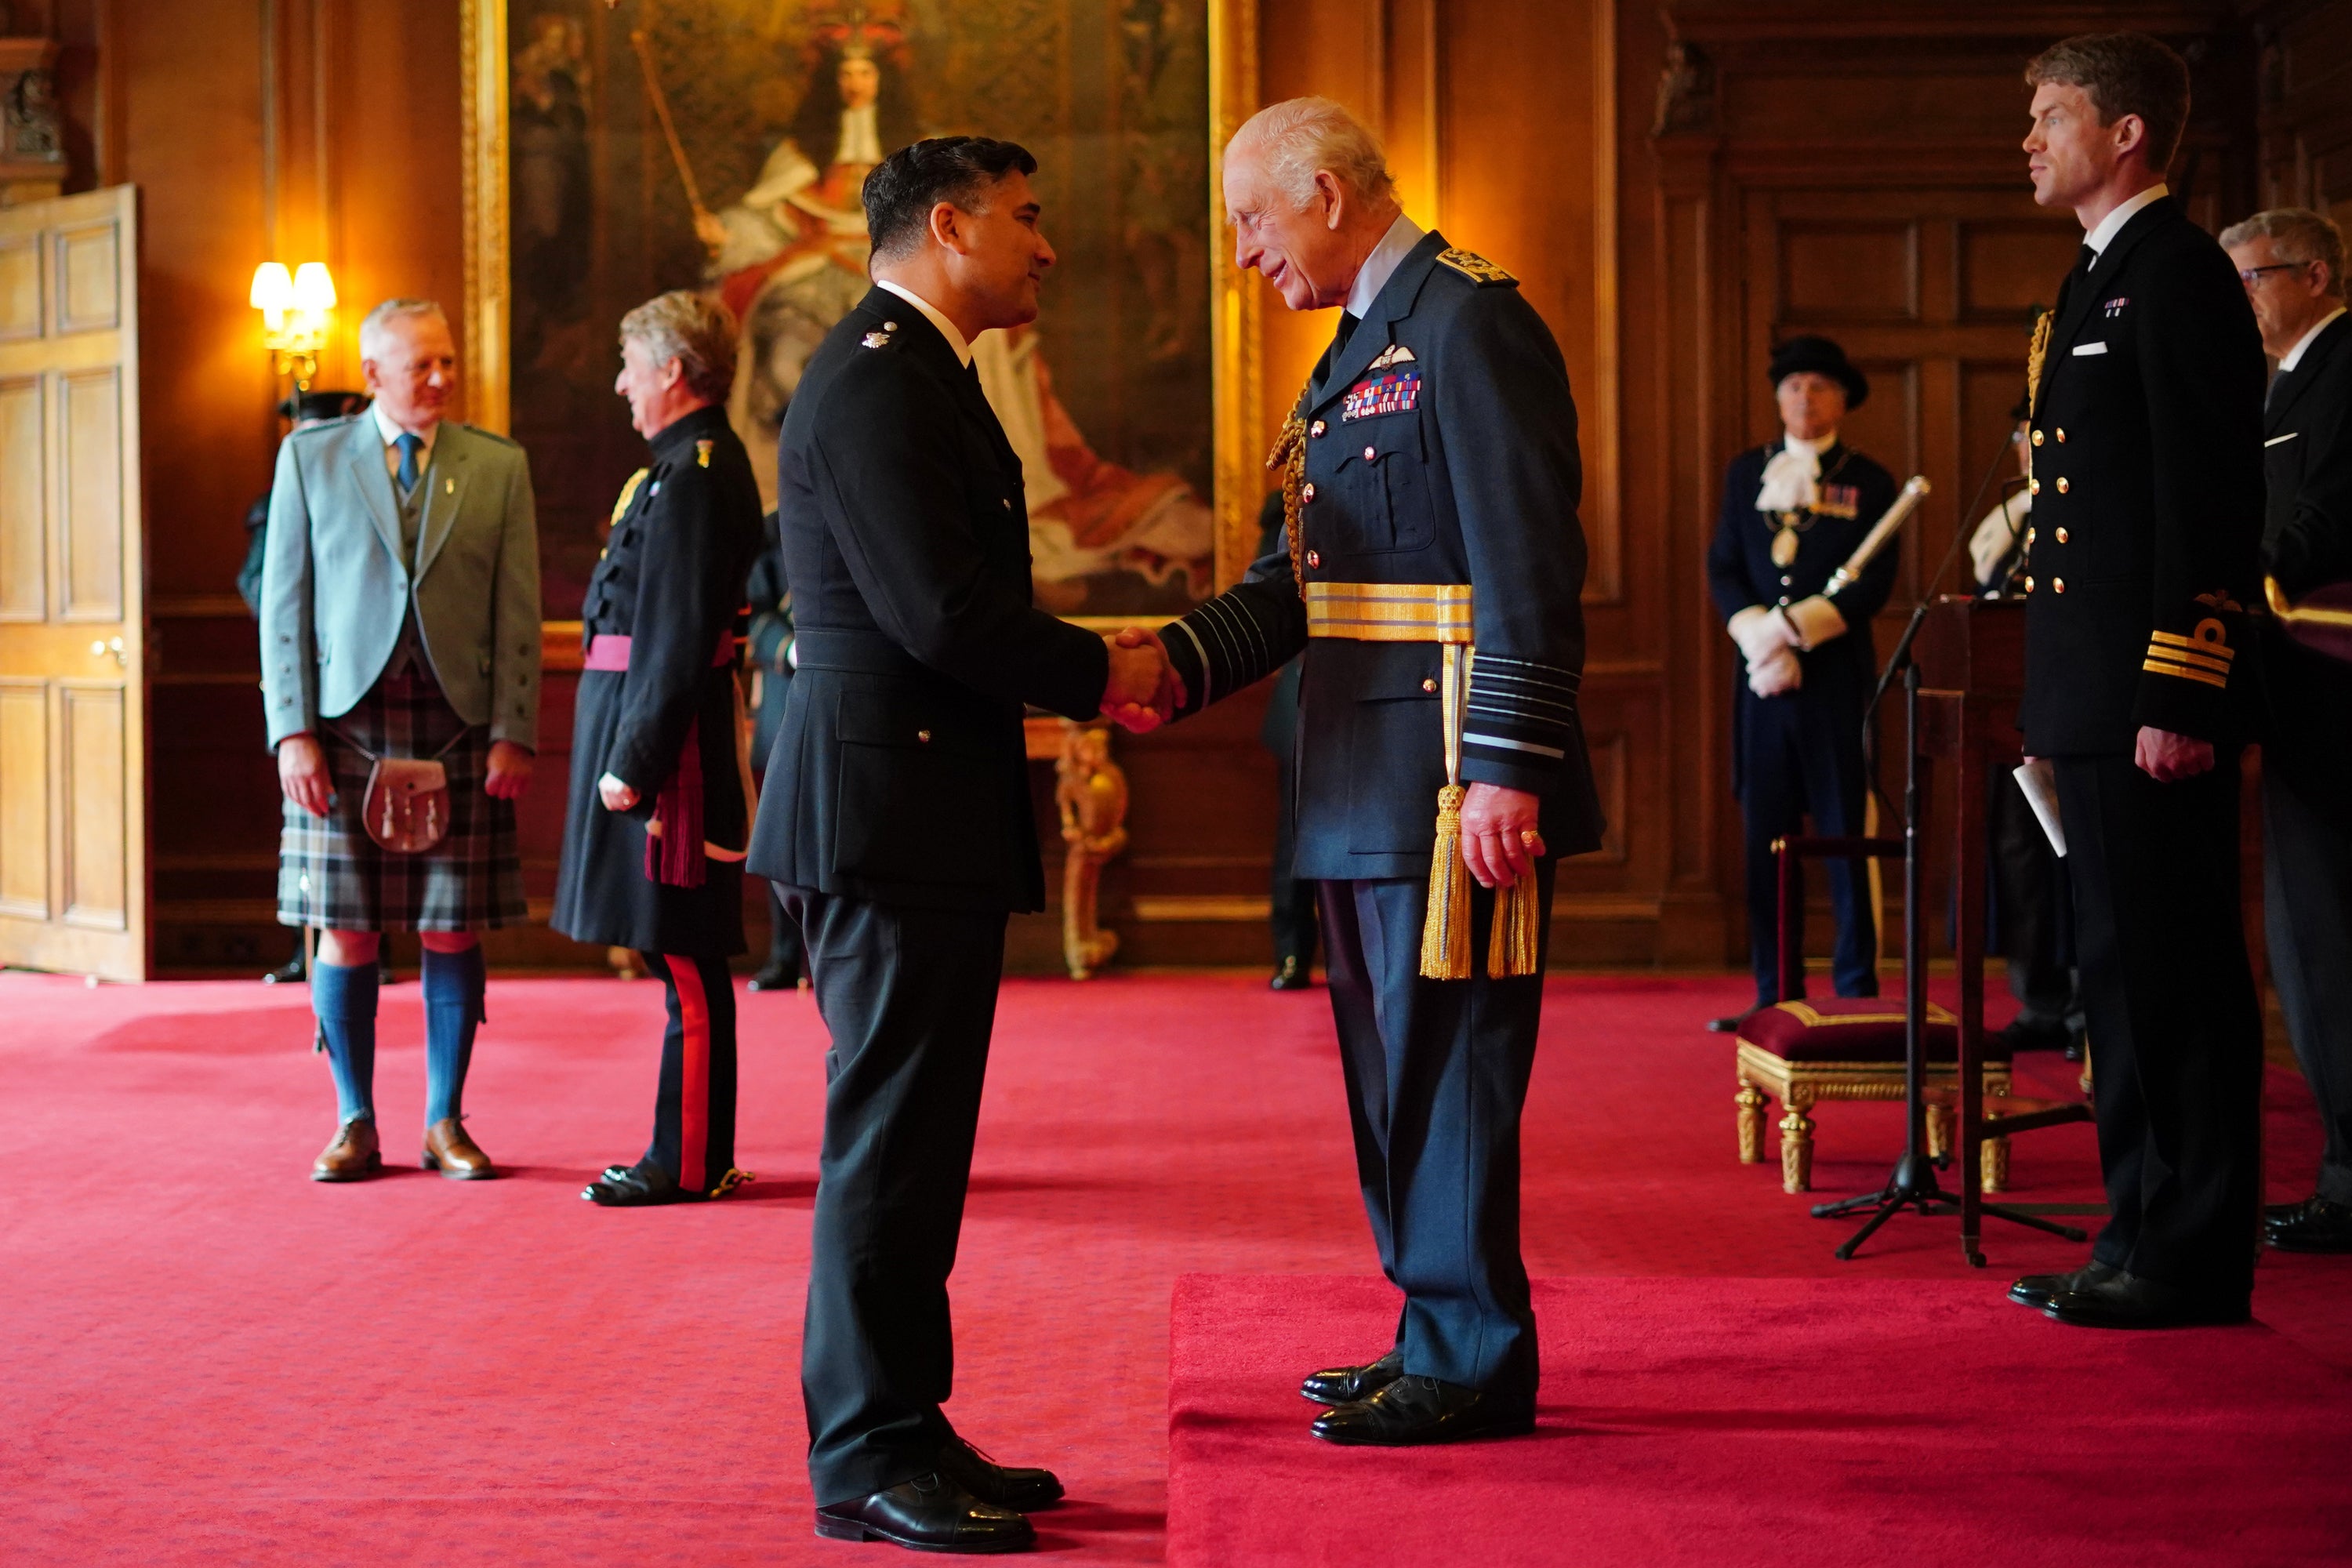 Chief Superintendent Faroque Hussain was decorated with the King’s Police Medal during the ceremony (Jane Barlow/PA)